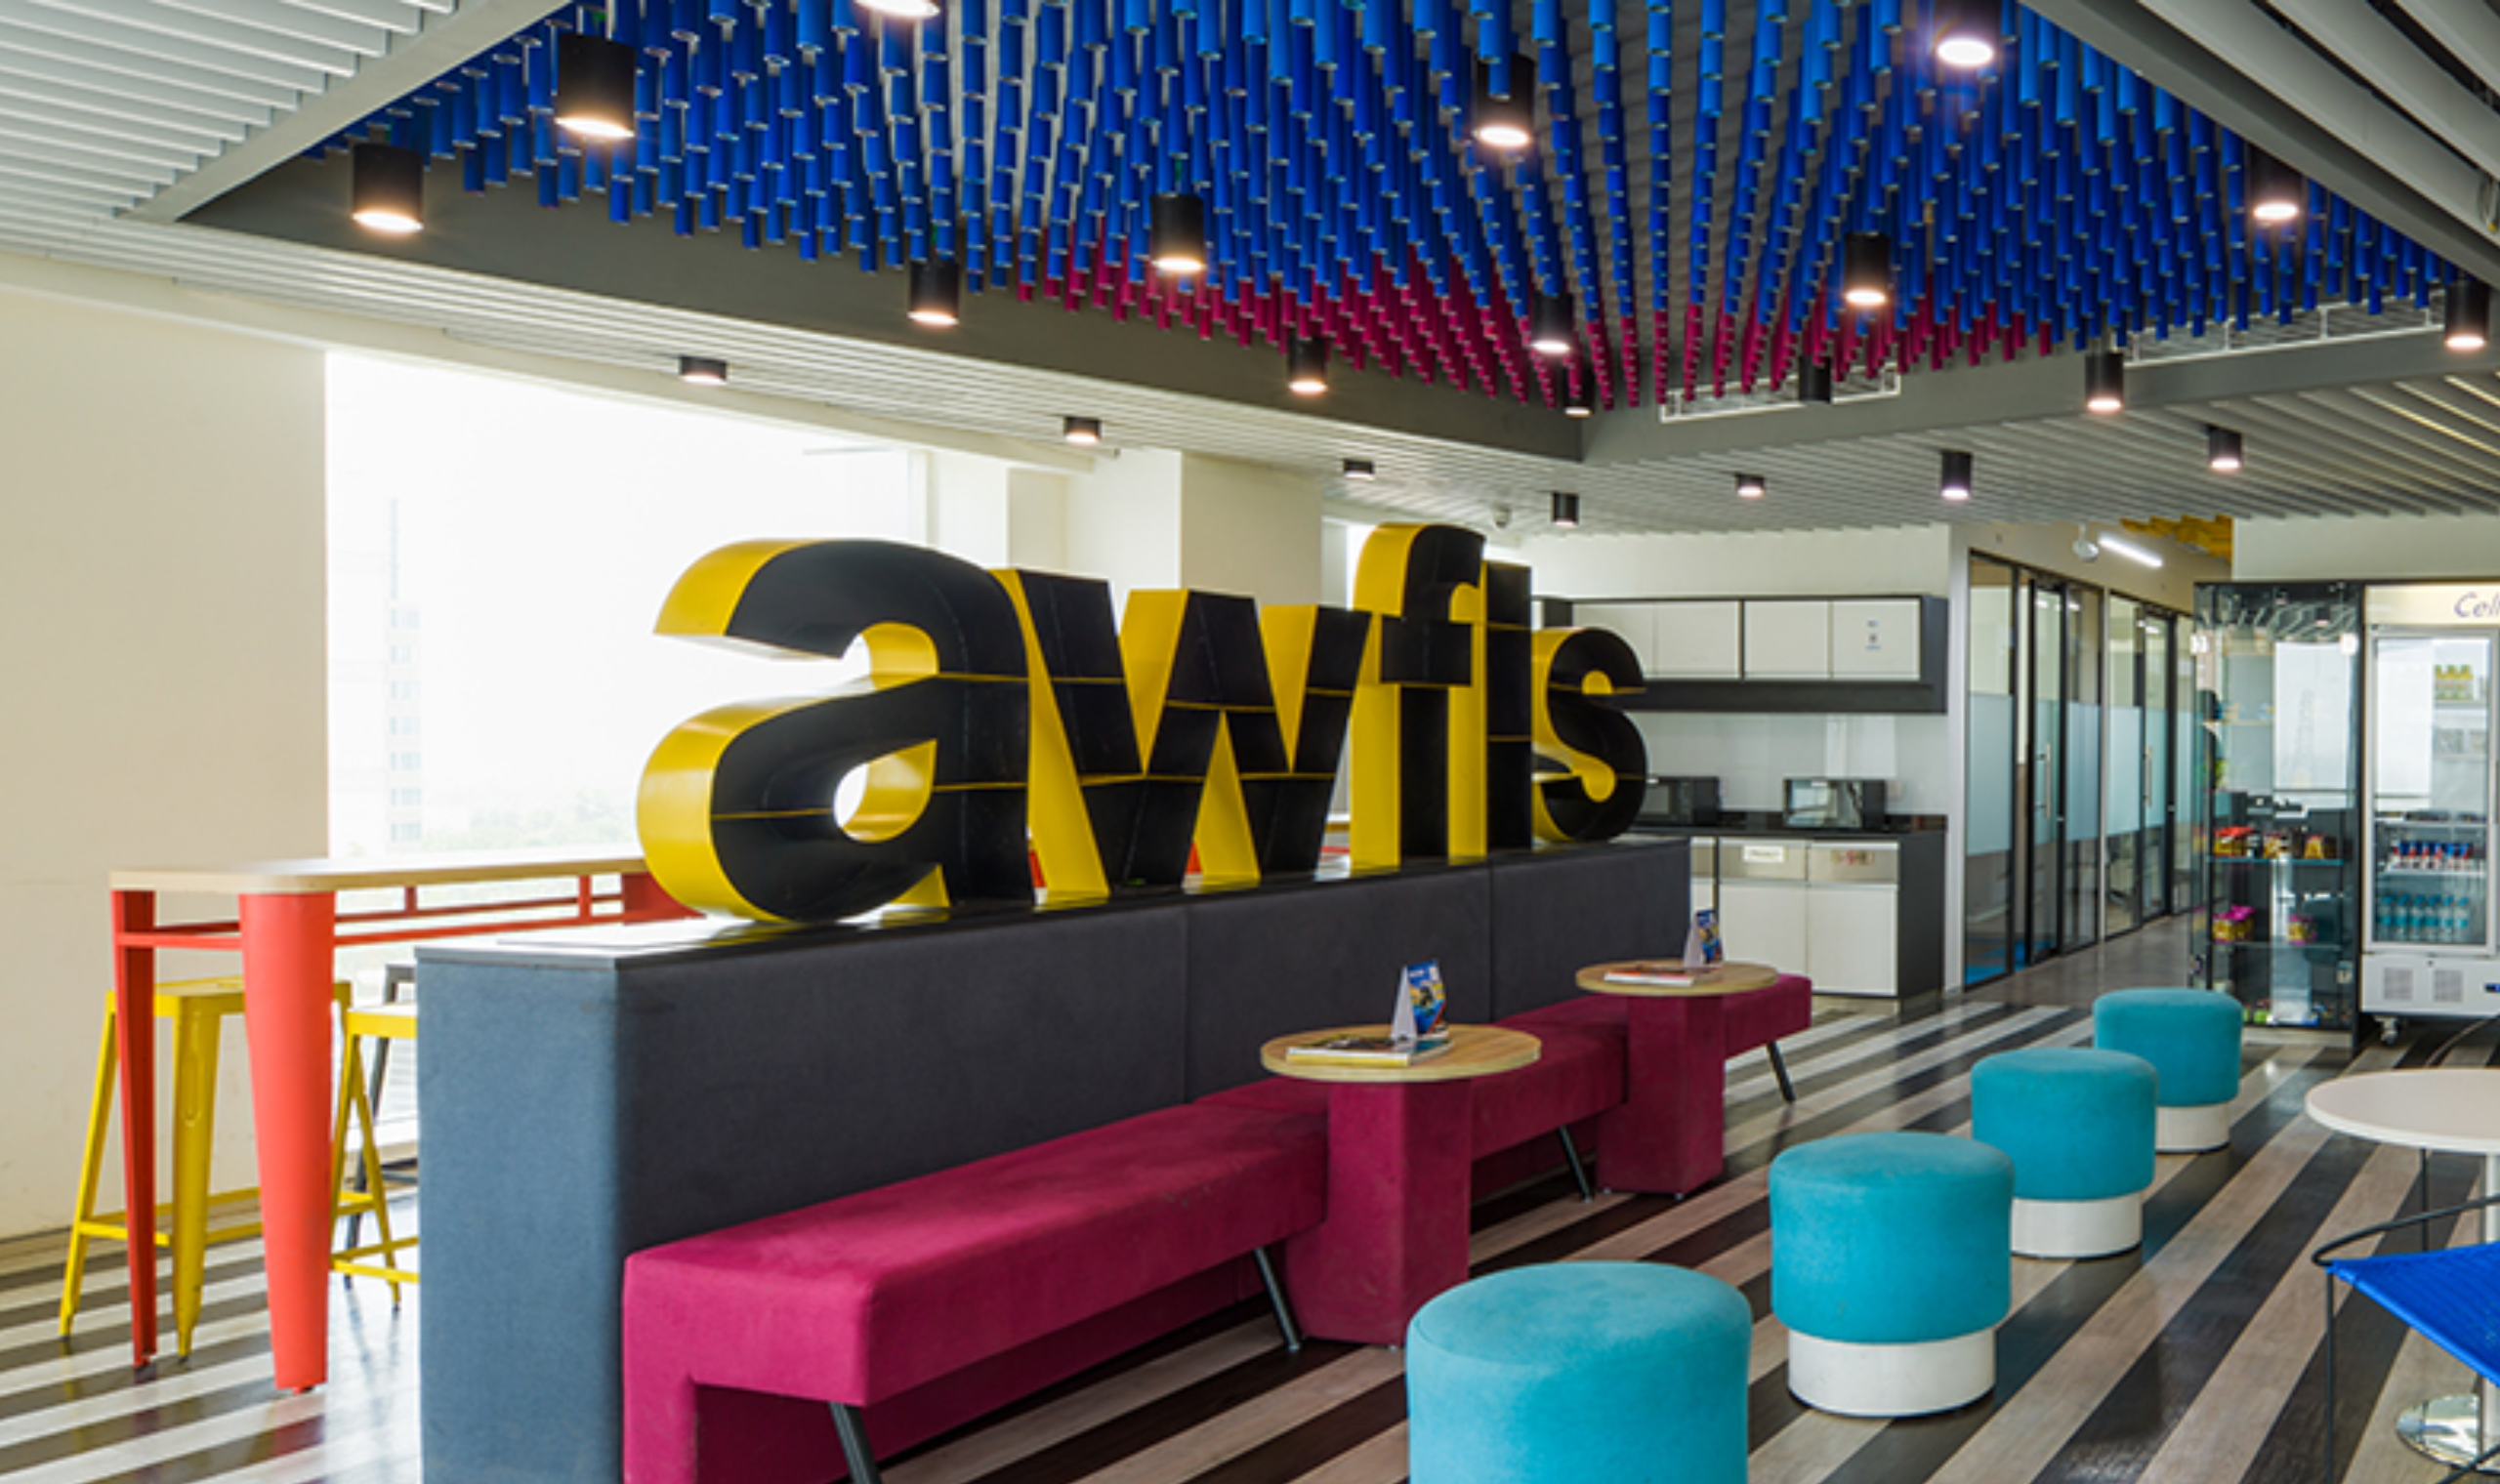 awfis ipo, Awfis Space Solutions IPO, awfis ipo update, stock market news